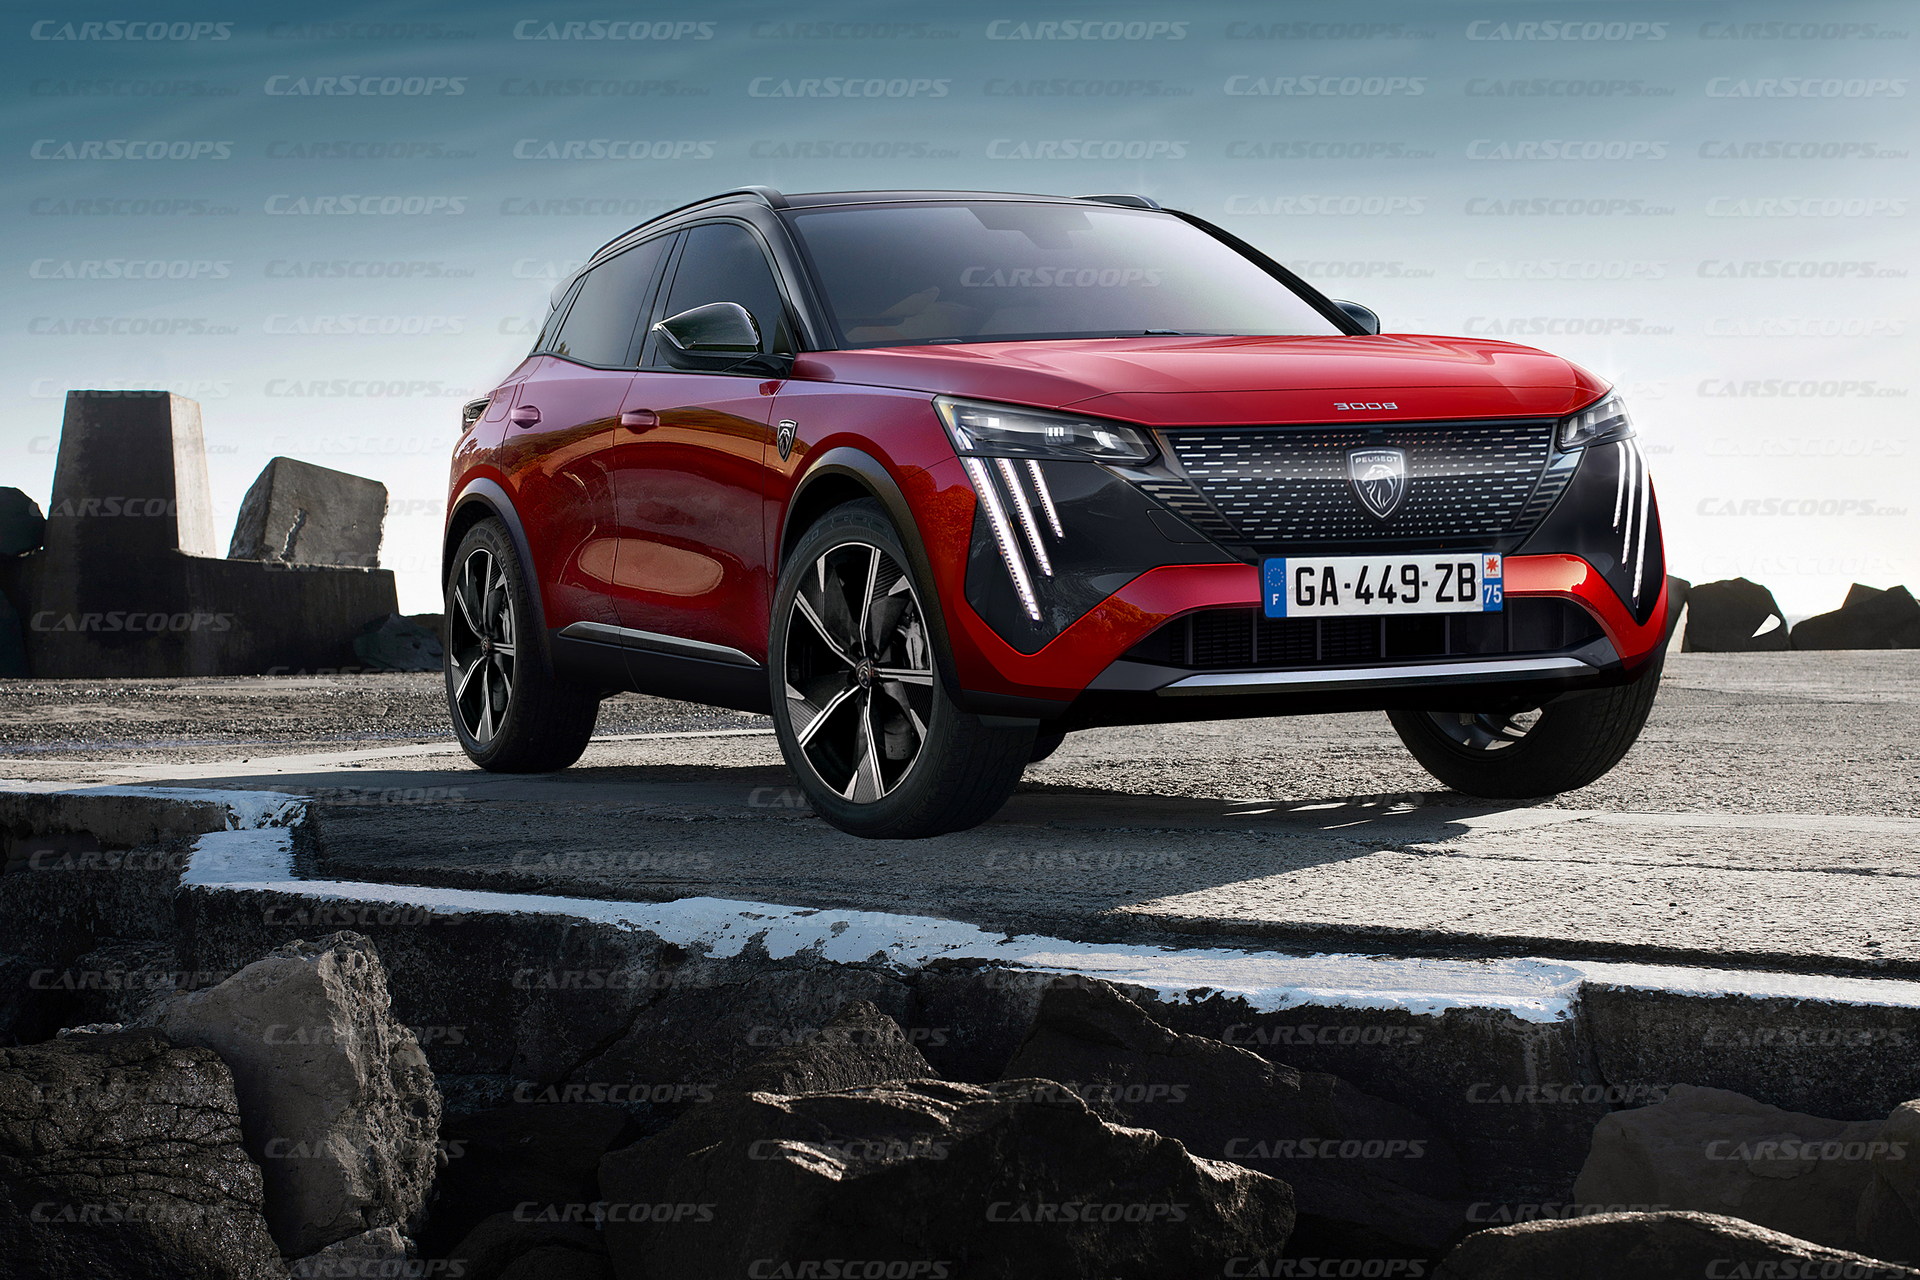 2023 Peugeot 3008 Coming To Reclaim Compact SUV Crown |